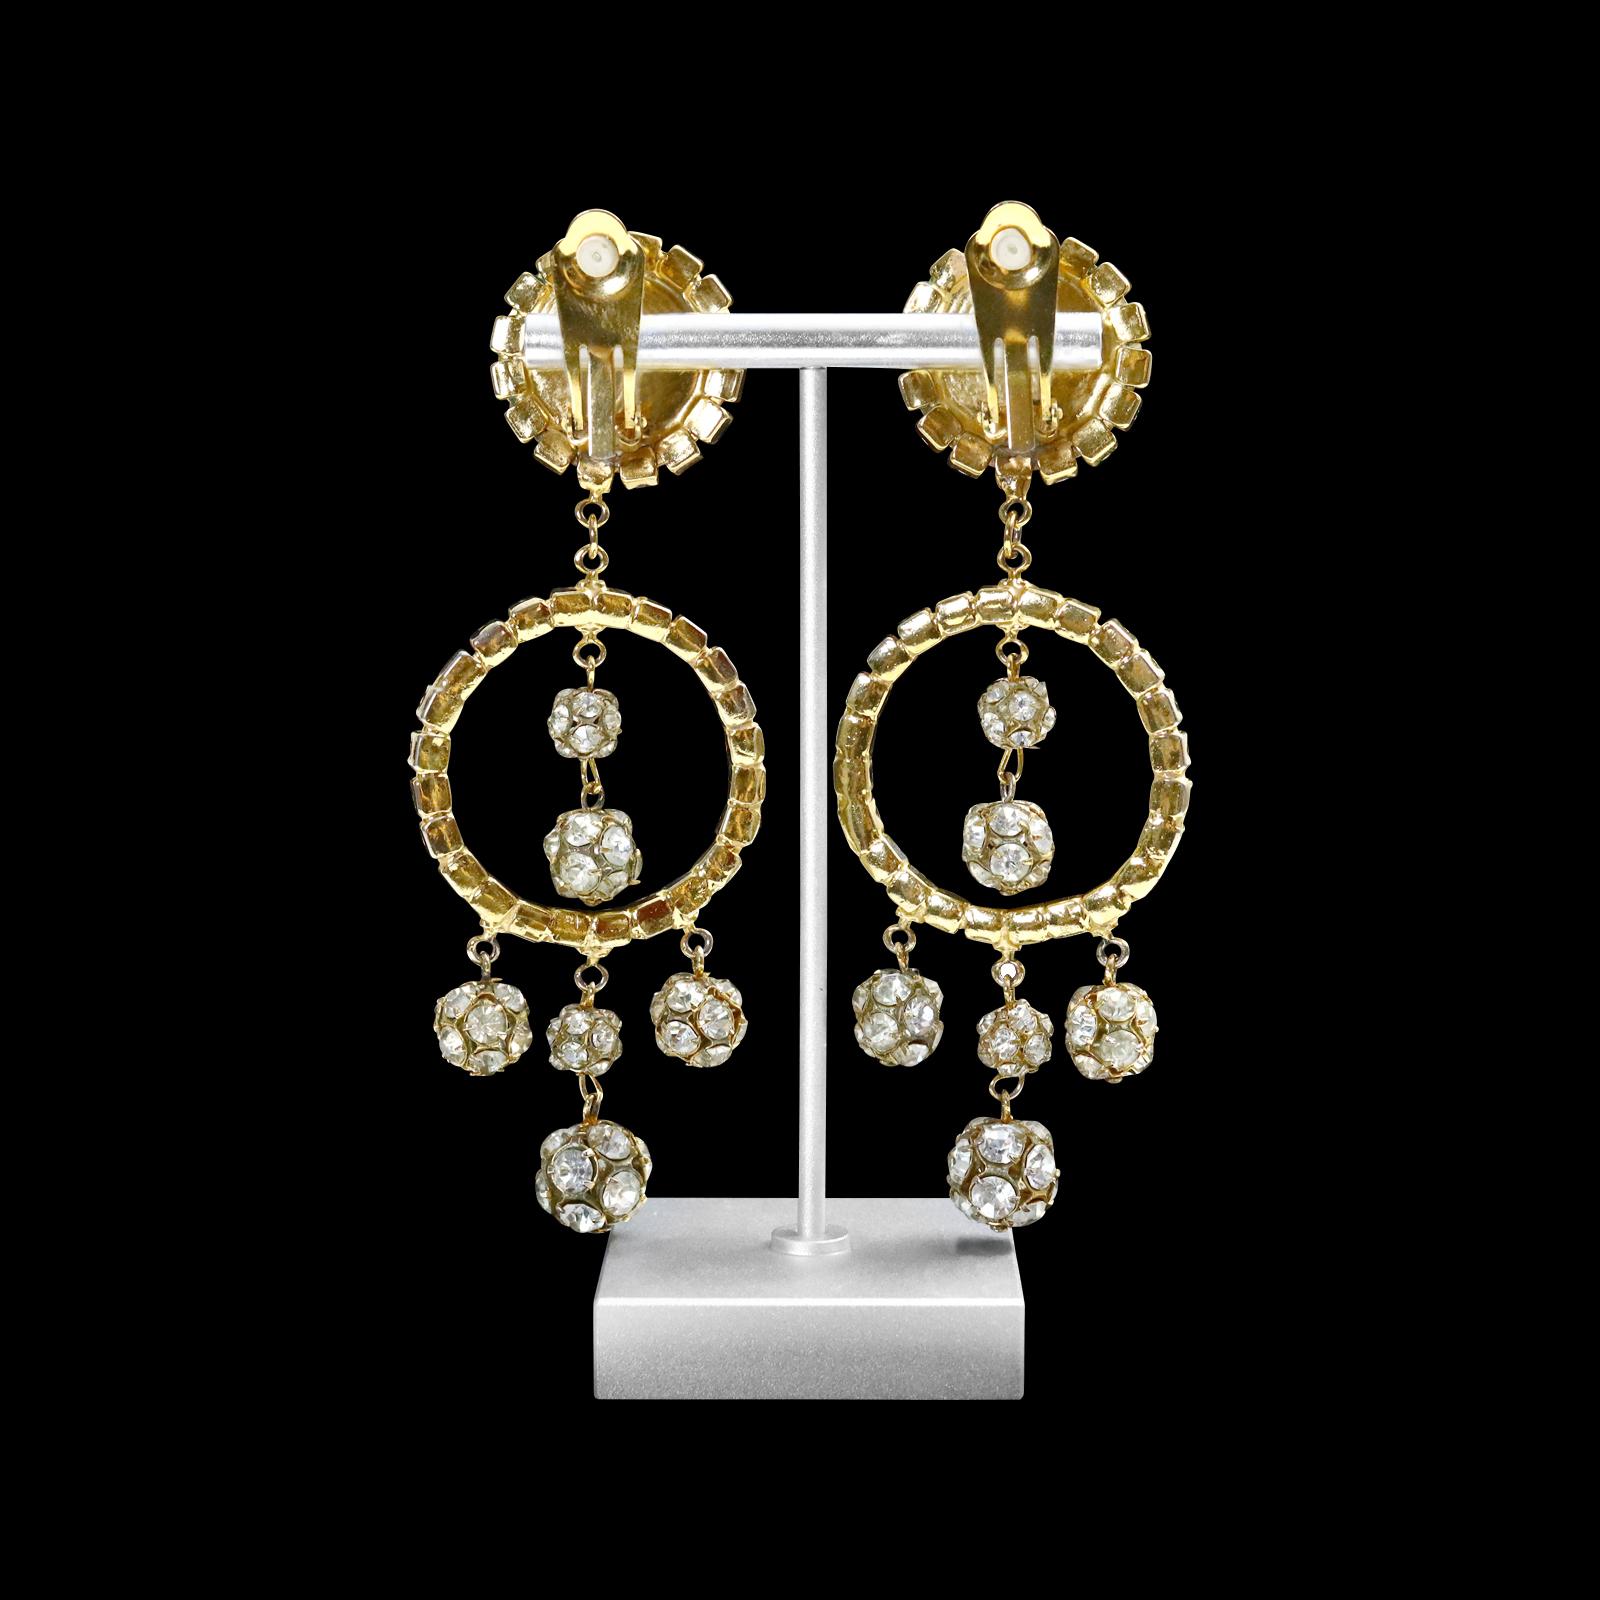 Vintage Gold Tone Diamante Long Dangling Earrings with Rondelles, Circa 1960s For Sale 7